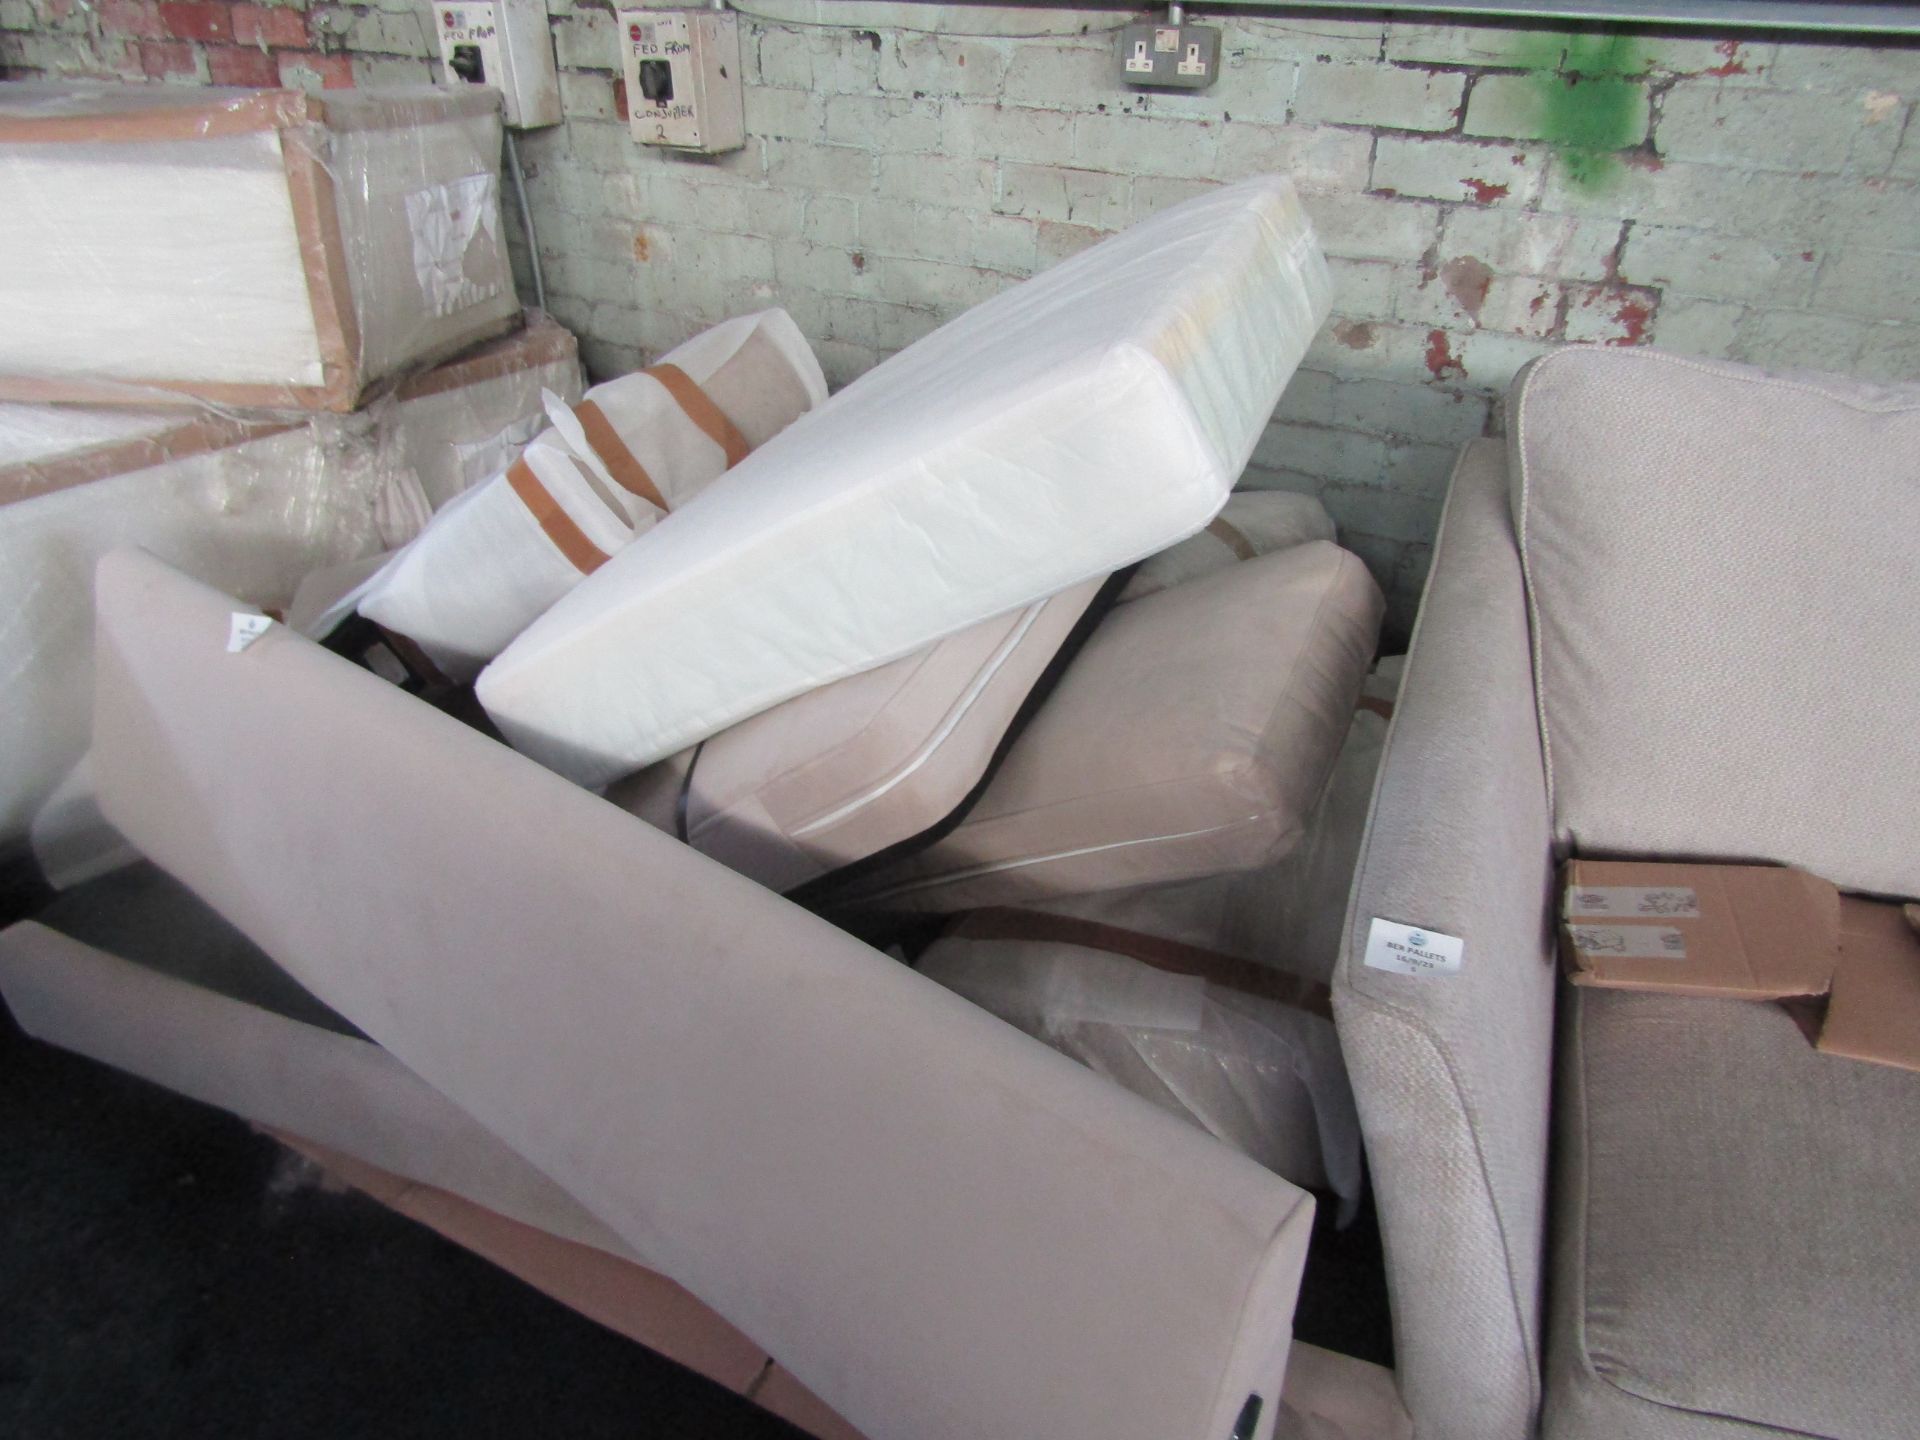 Snug Shack Big Chill Three Seater Sofa Taupe Brown Wooden legs RRP 1369.00damage to frame in